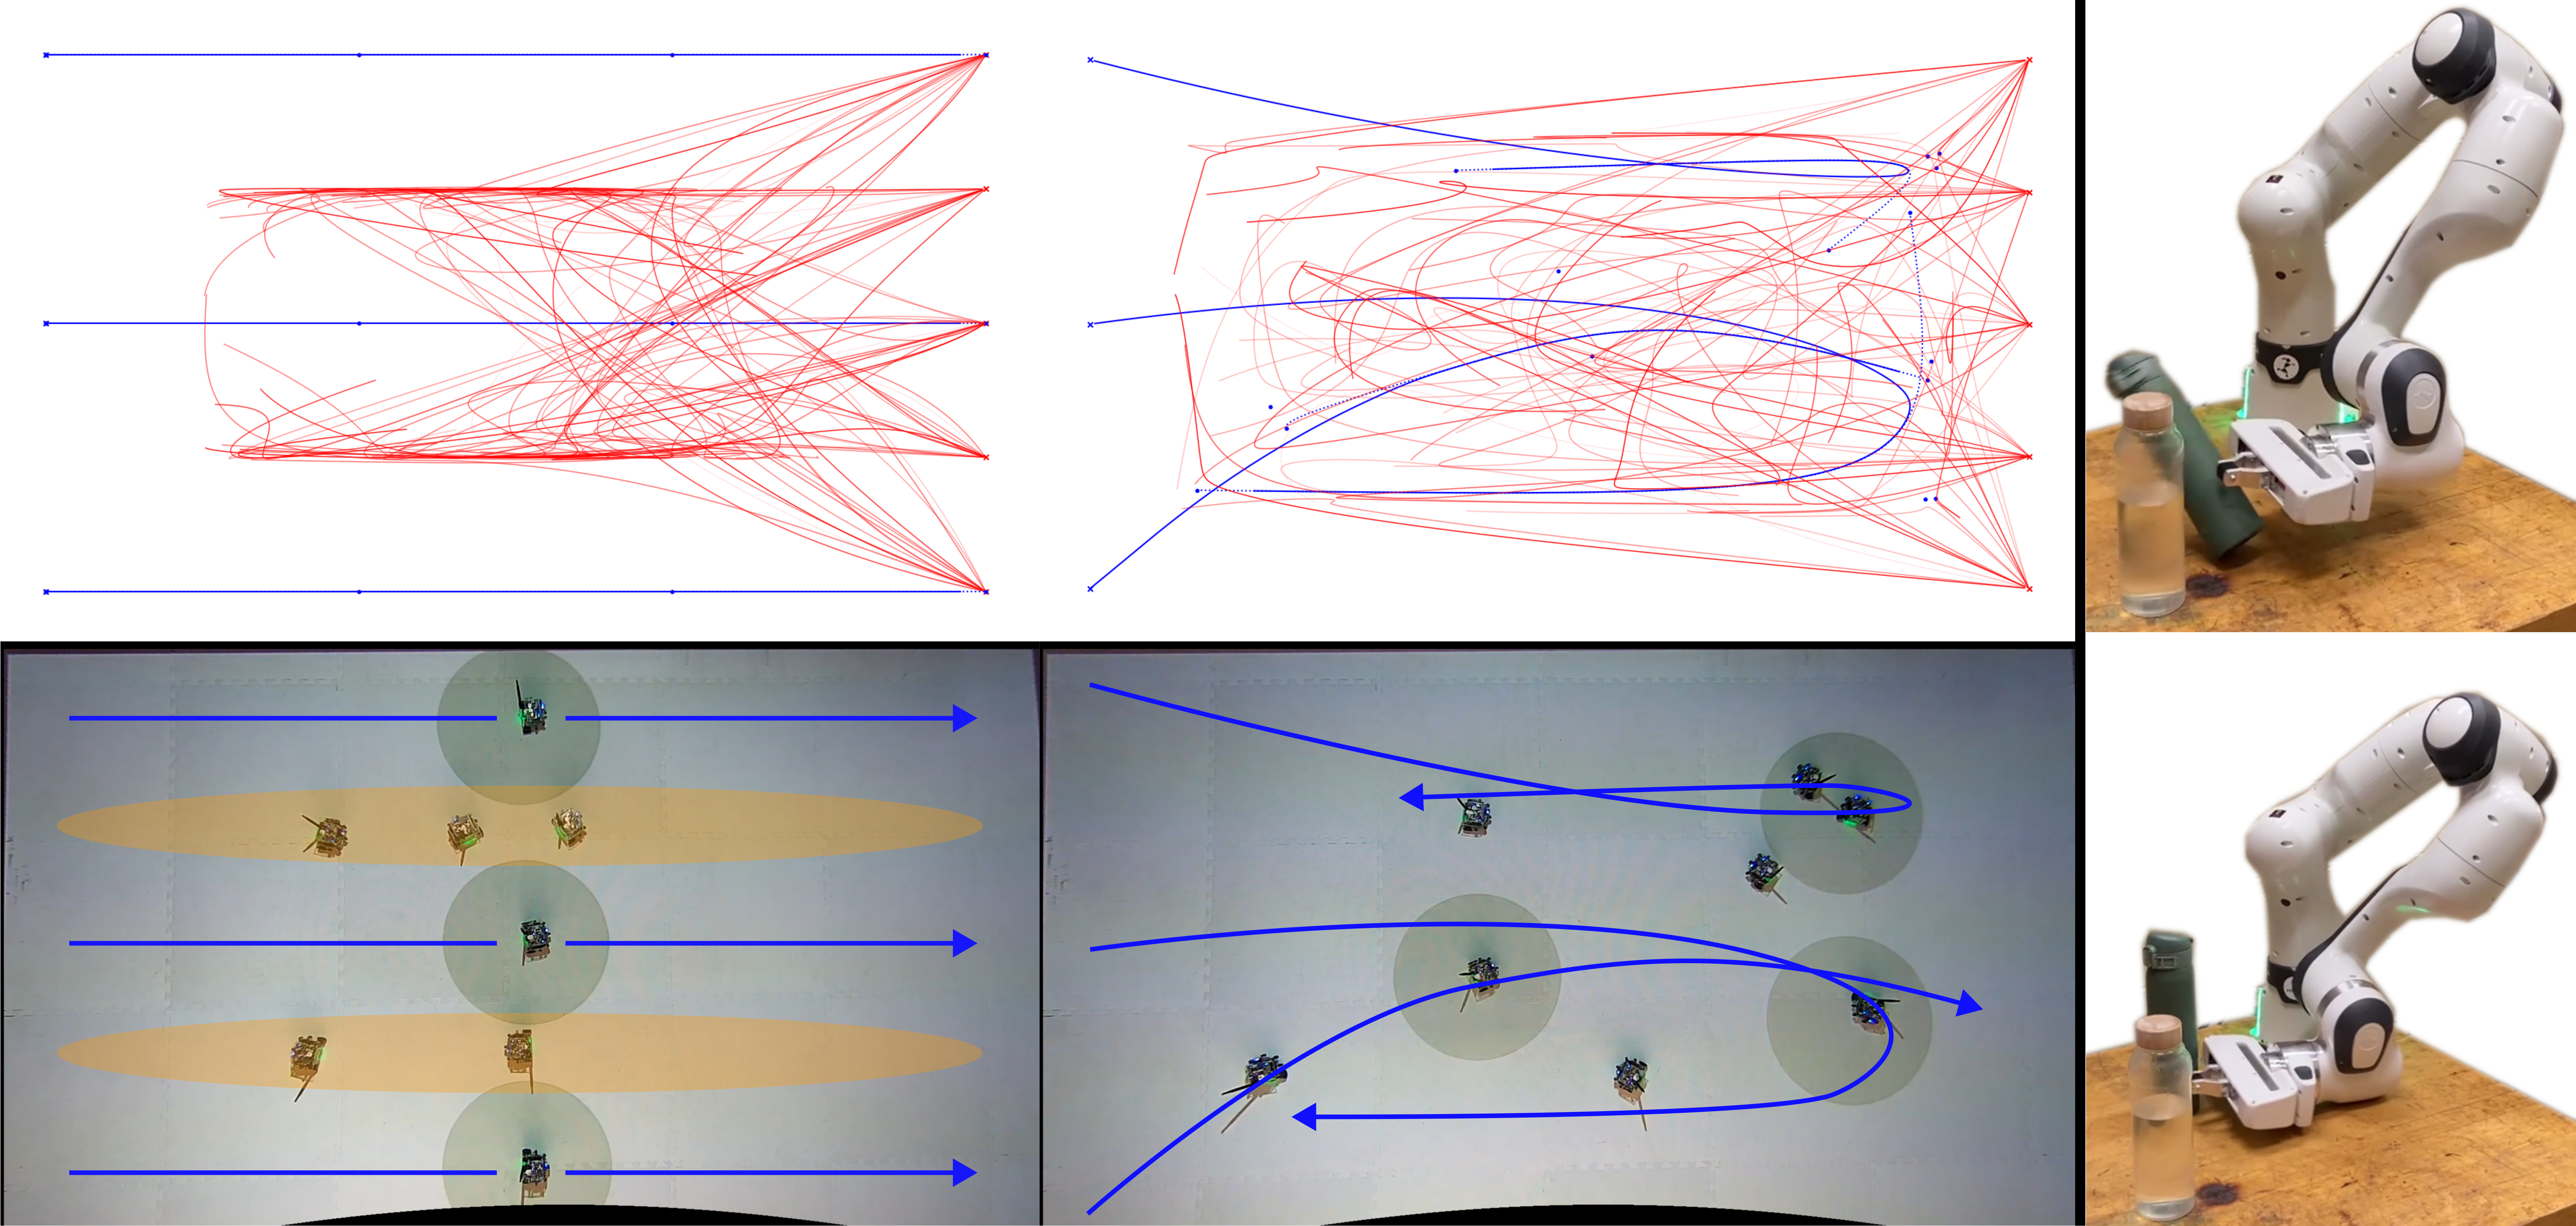 (Left) HW results for search-evasion with 5 hiders and 3 seekers, showing an initial search pattern (blue) and predicted failure modes (red). (Center) HW results for an optimized search pattern leaves fewer hiding places. (Right, top) An initial manipulation policy knocks over the object. (Right, bottom) The repaired manipulation policy pushes without knocking the bottle over.